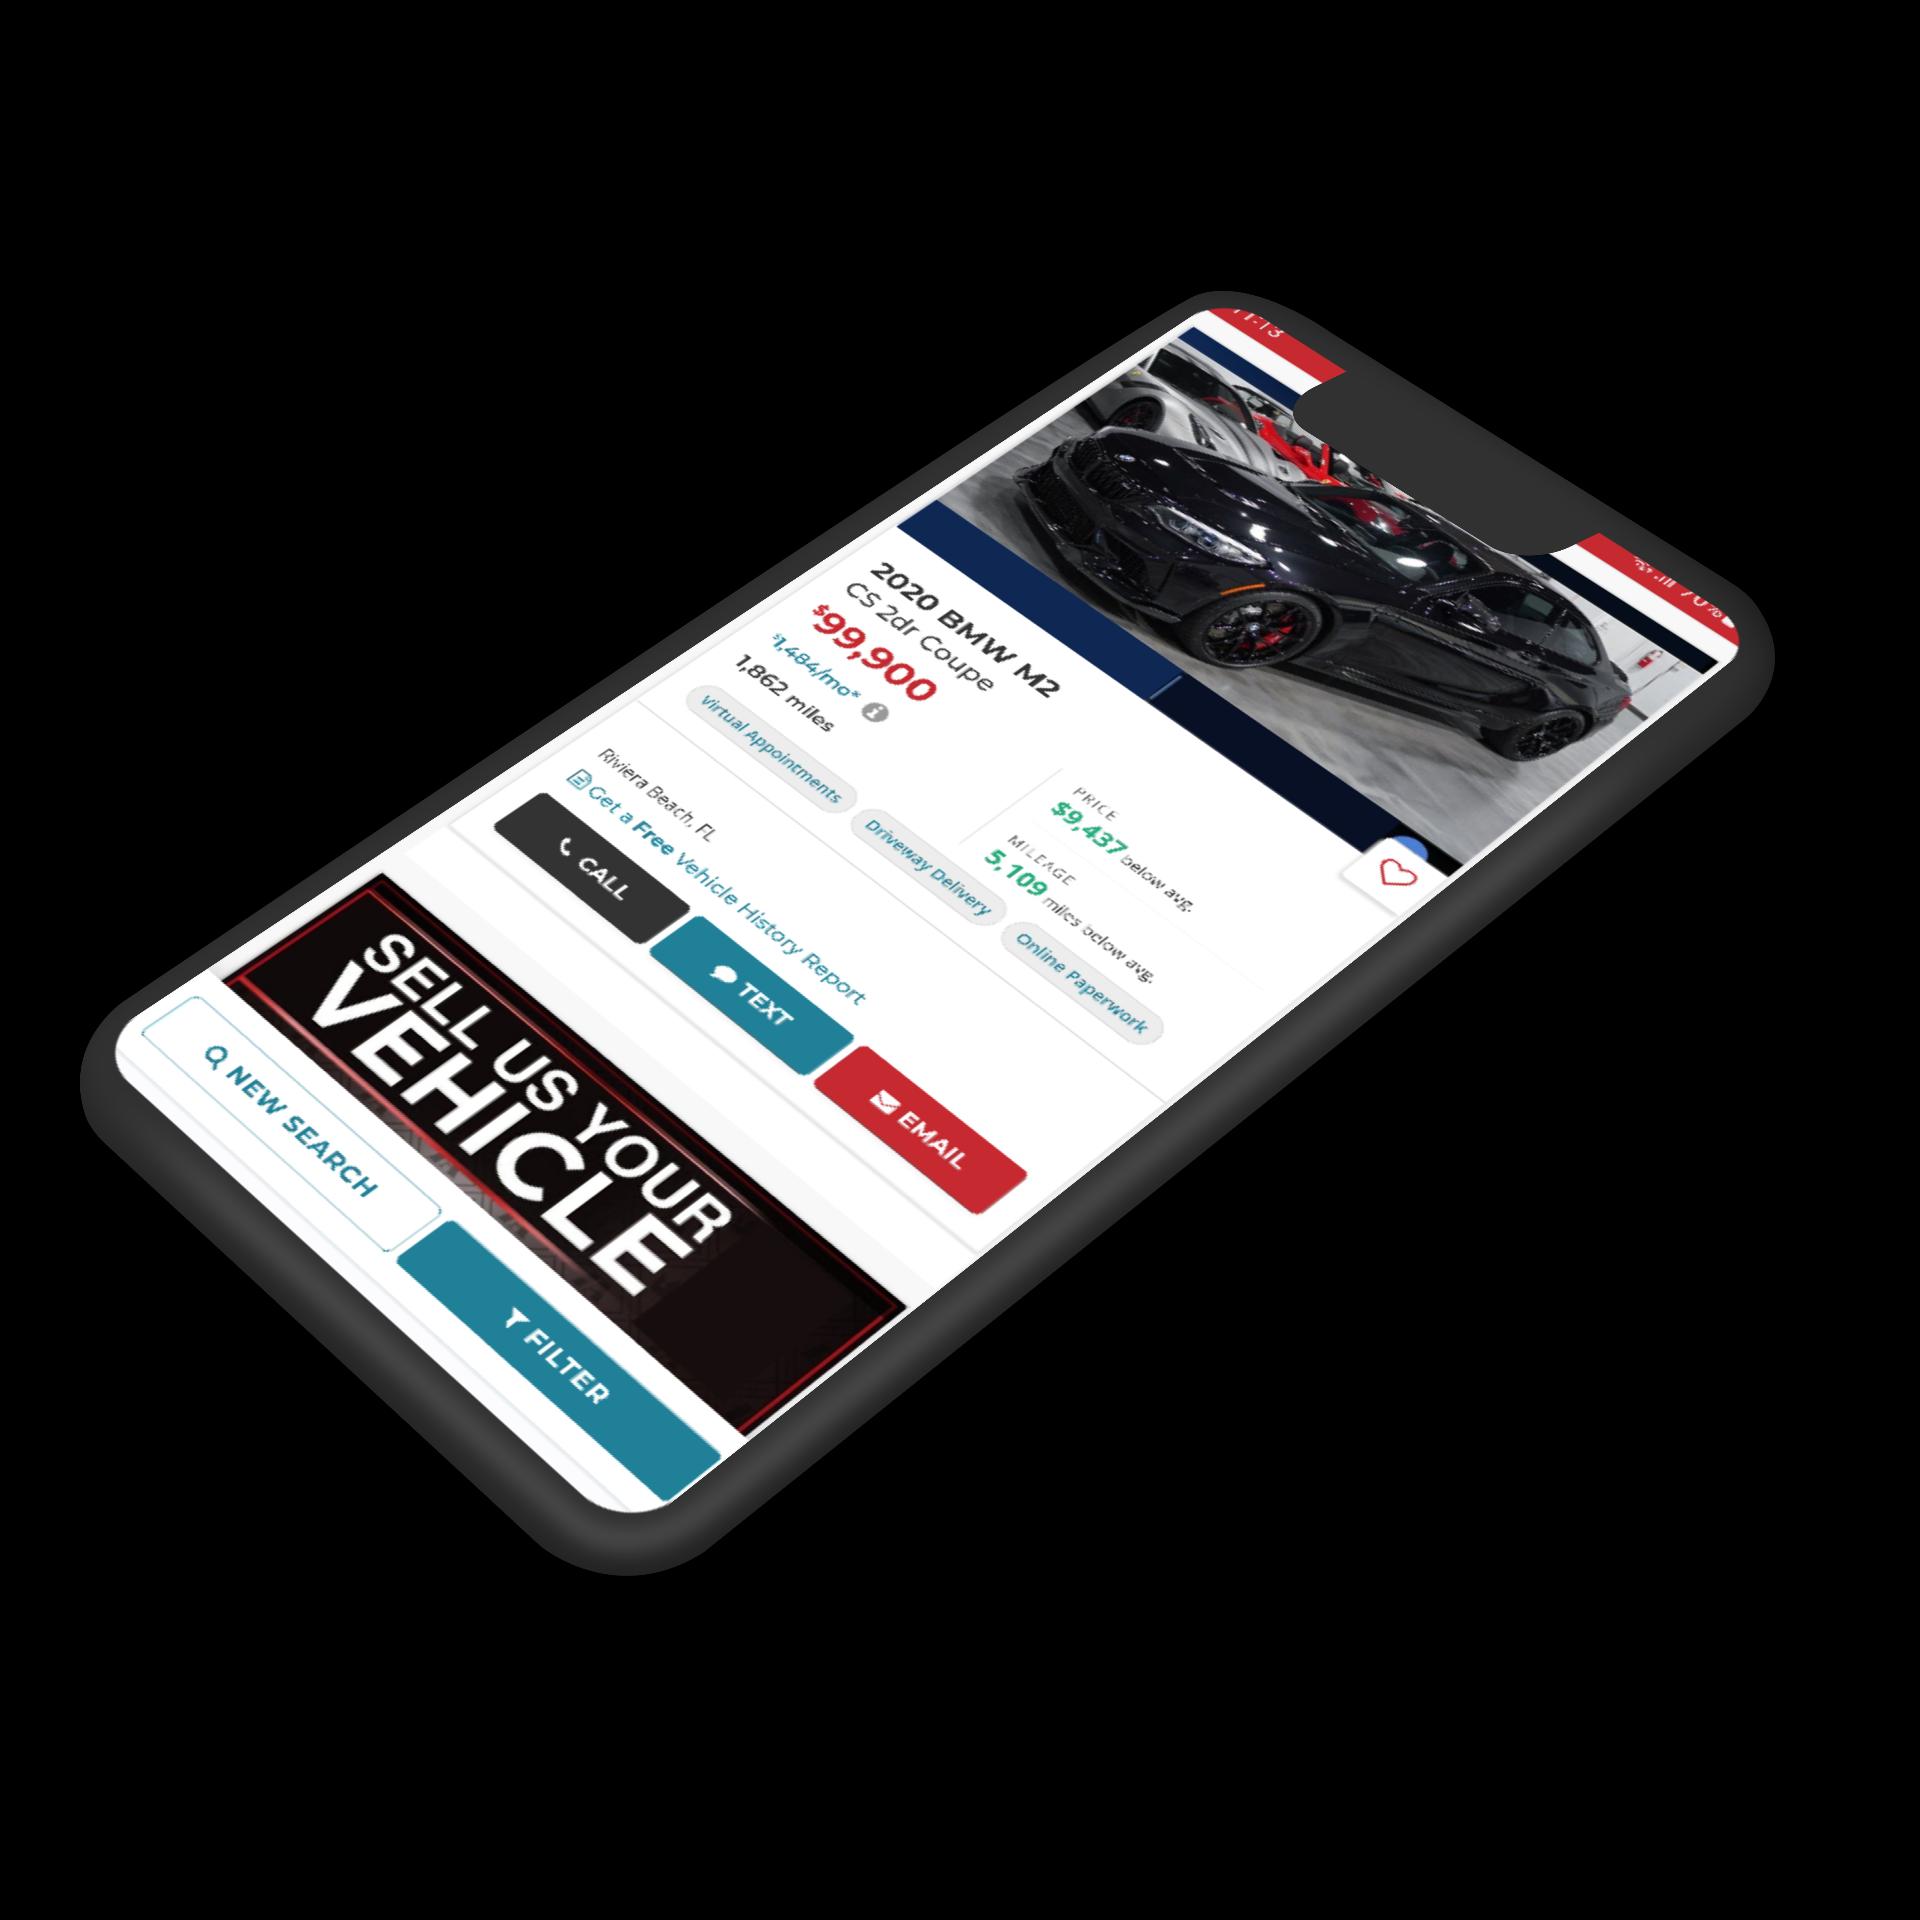 Buy Used Cars in USA APK Download for Android - Latest Version